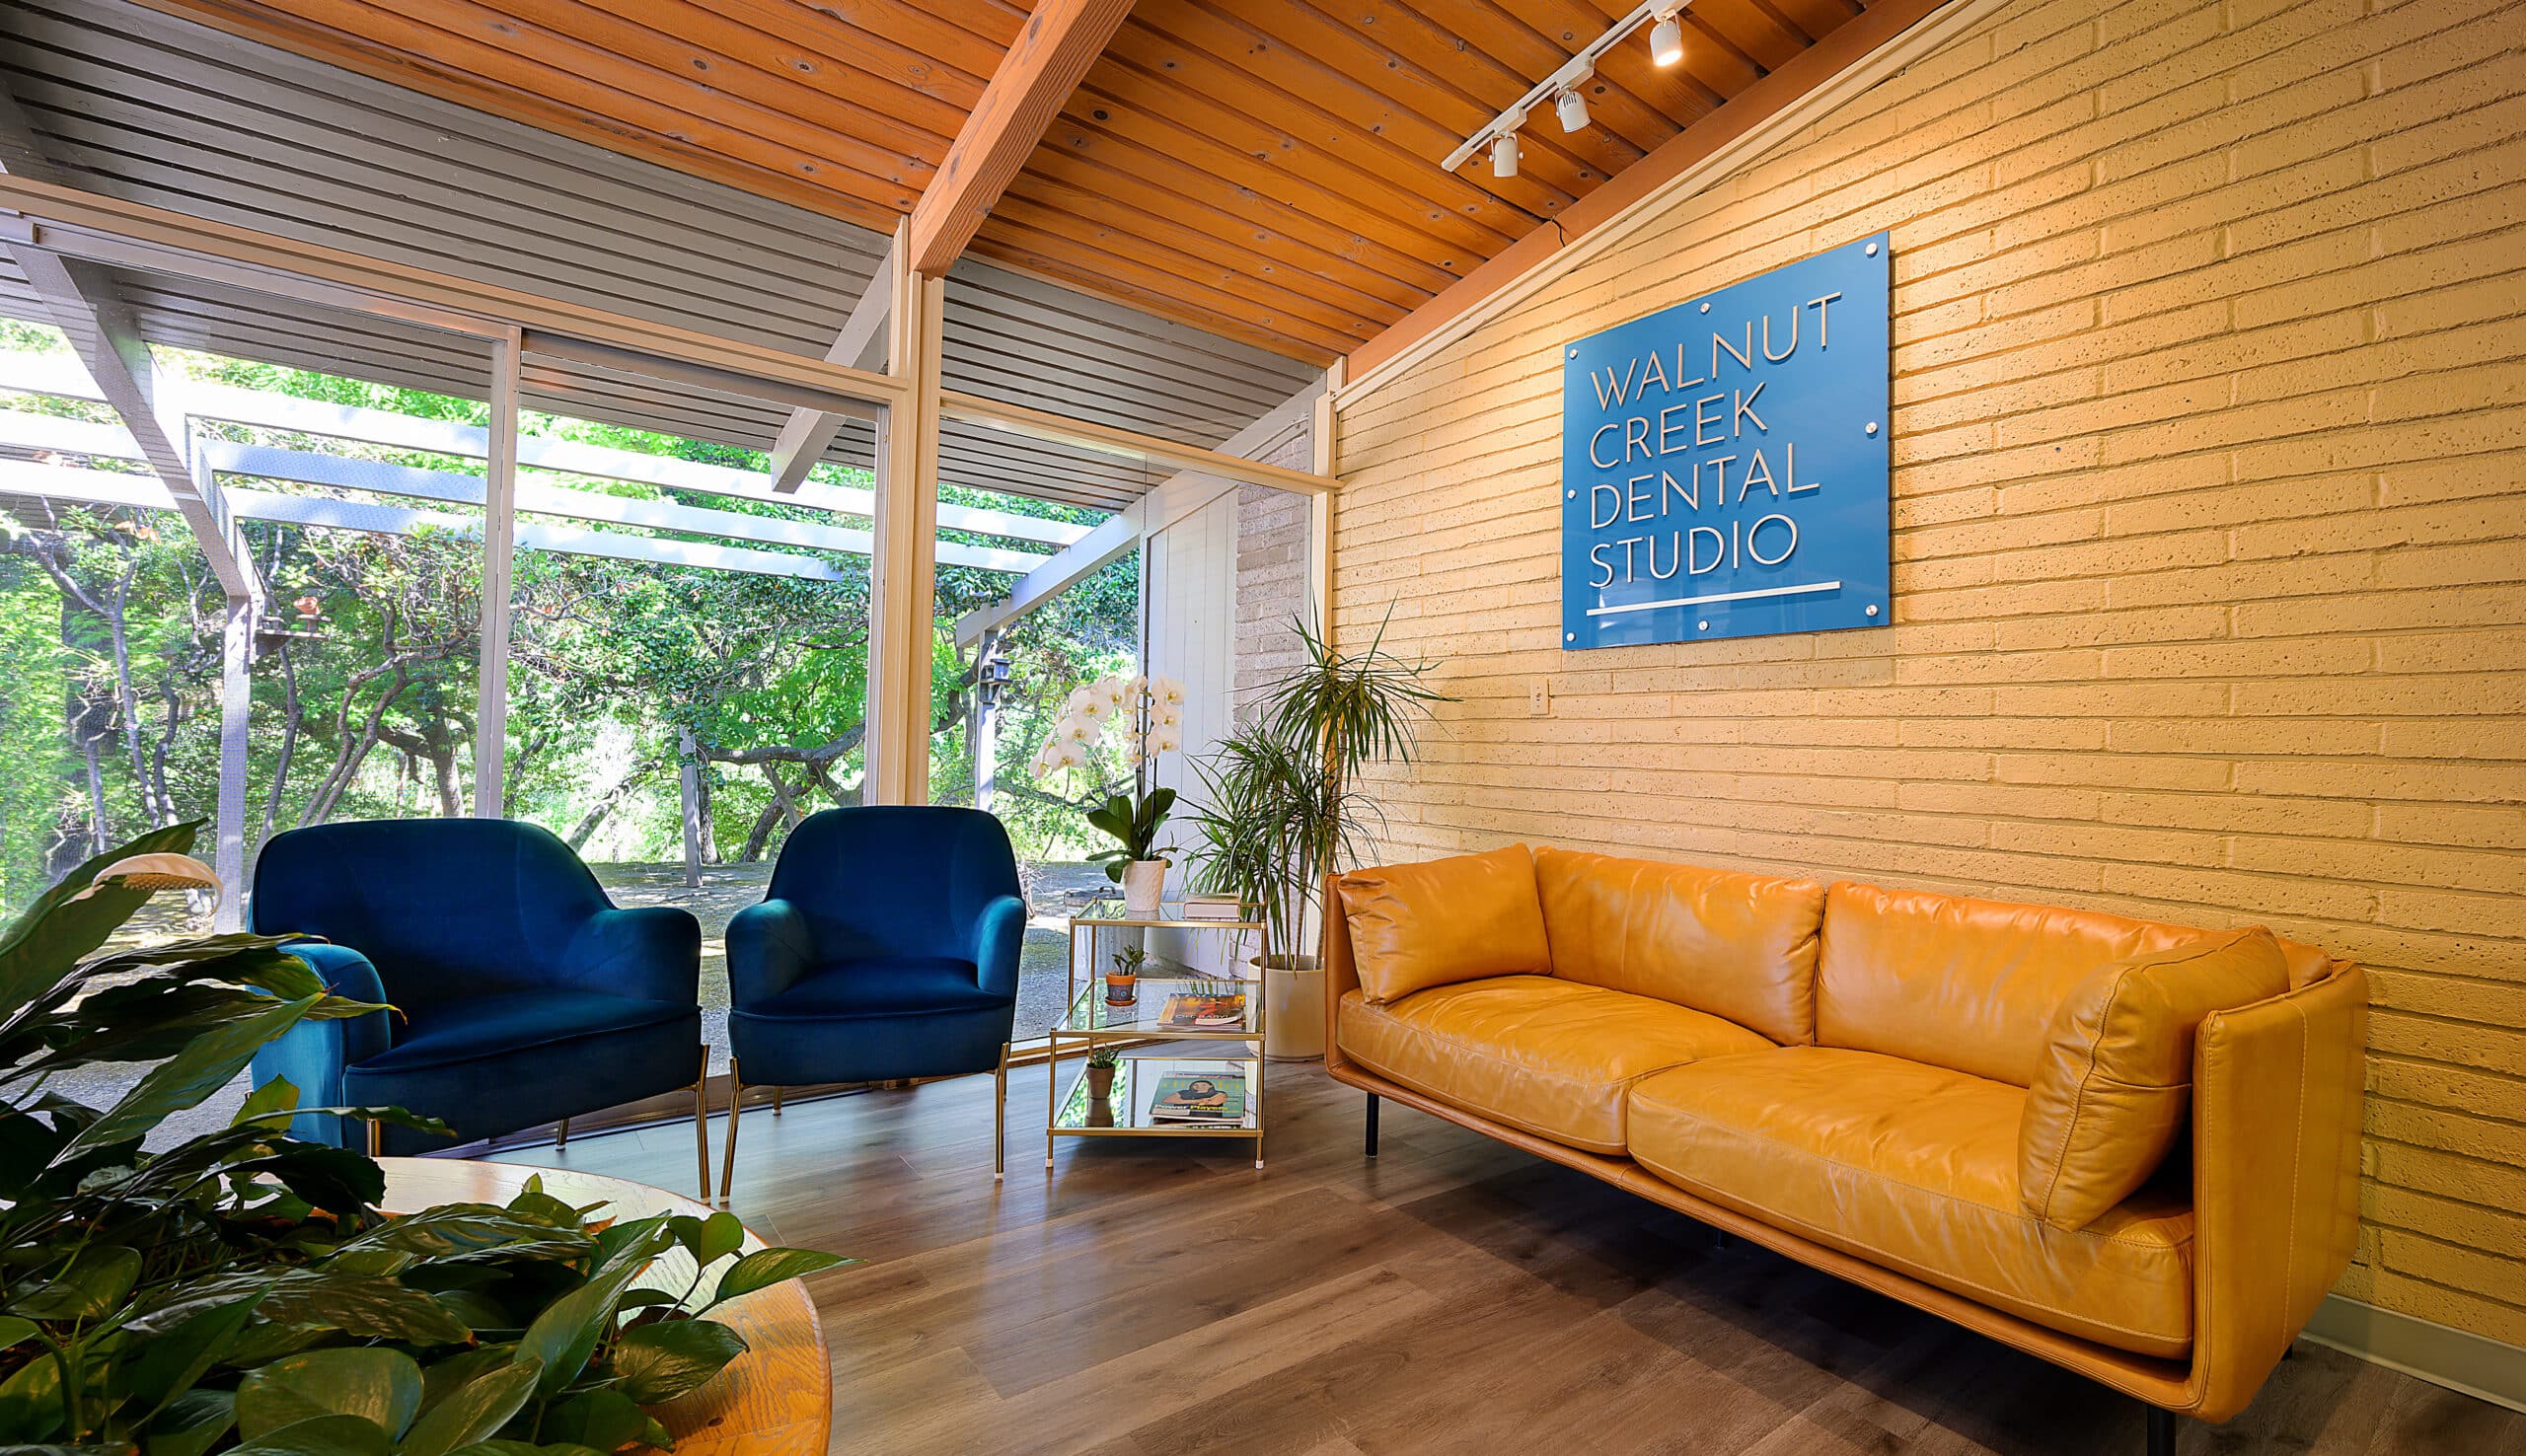 Walnut Creek Dental Studio's waiting area warmly greets patients with floor-to-ceiling windows and comfortable seating